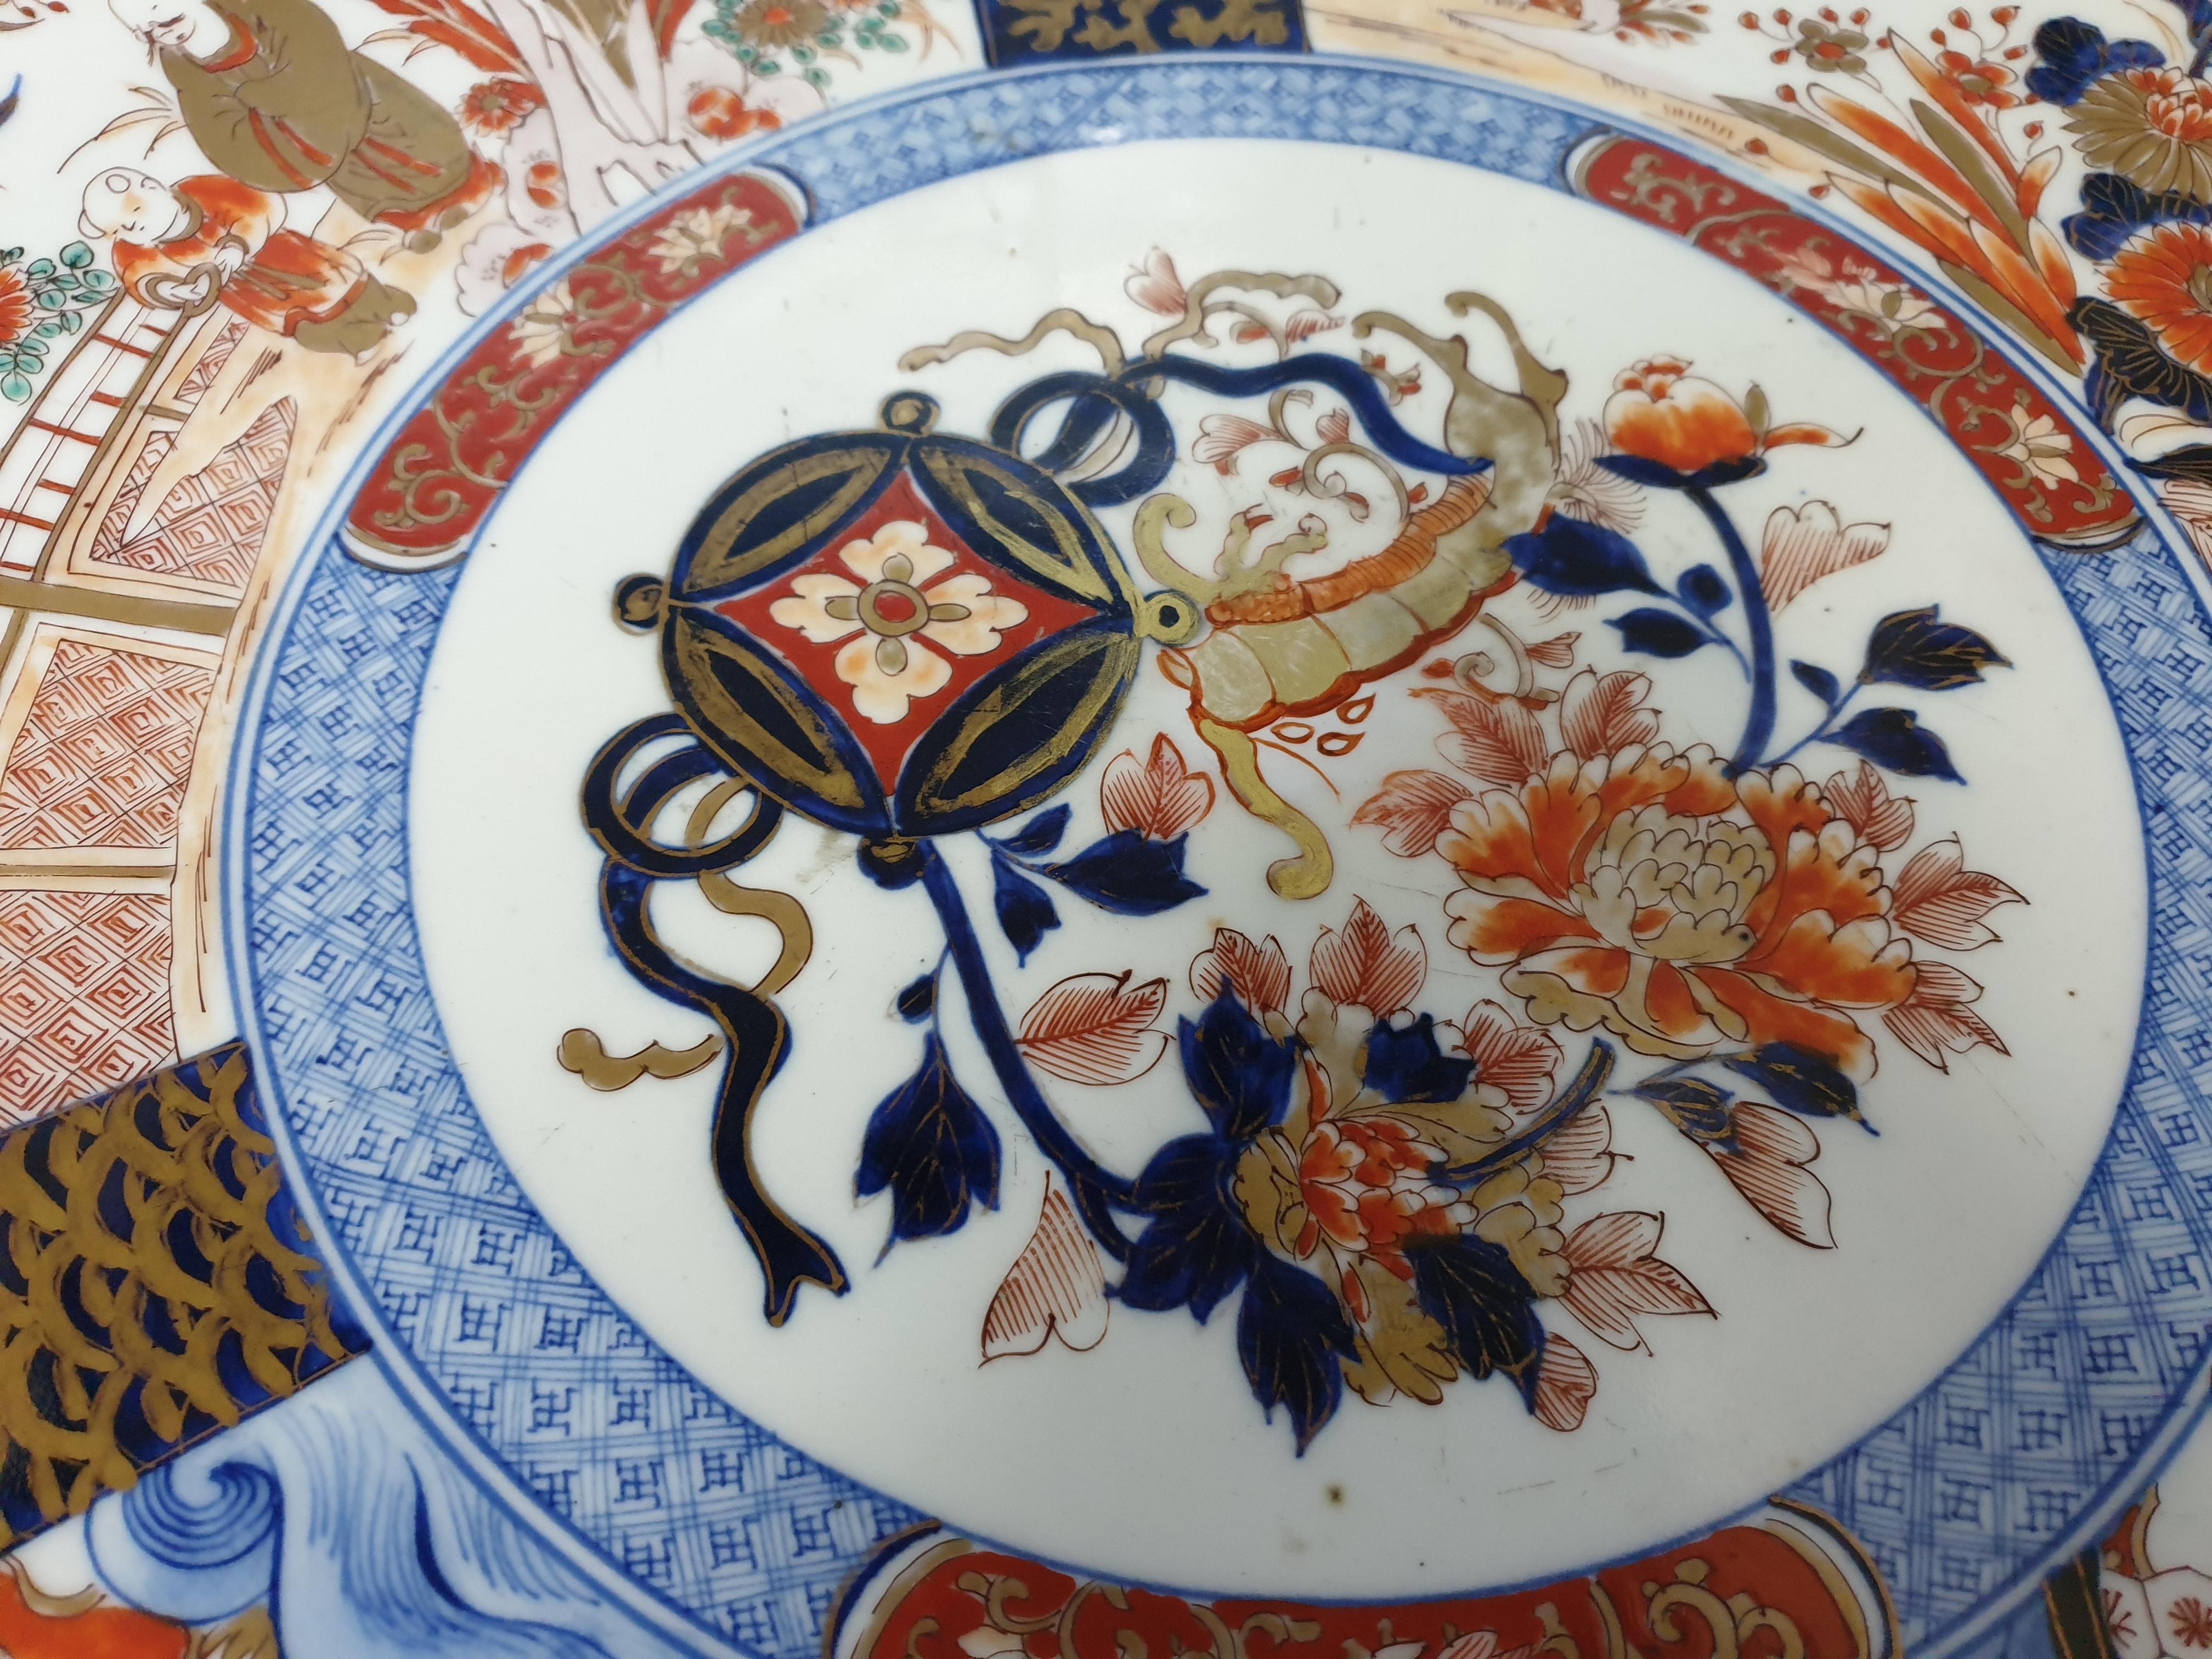 An extremely large Japanese Imari platter or charger Meiji period with paneled scenes and jeweled designs. The platter is very impressive and is divided into 3 panels each depicting a new view interspersed within scenes of nature. Each scene of the